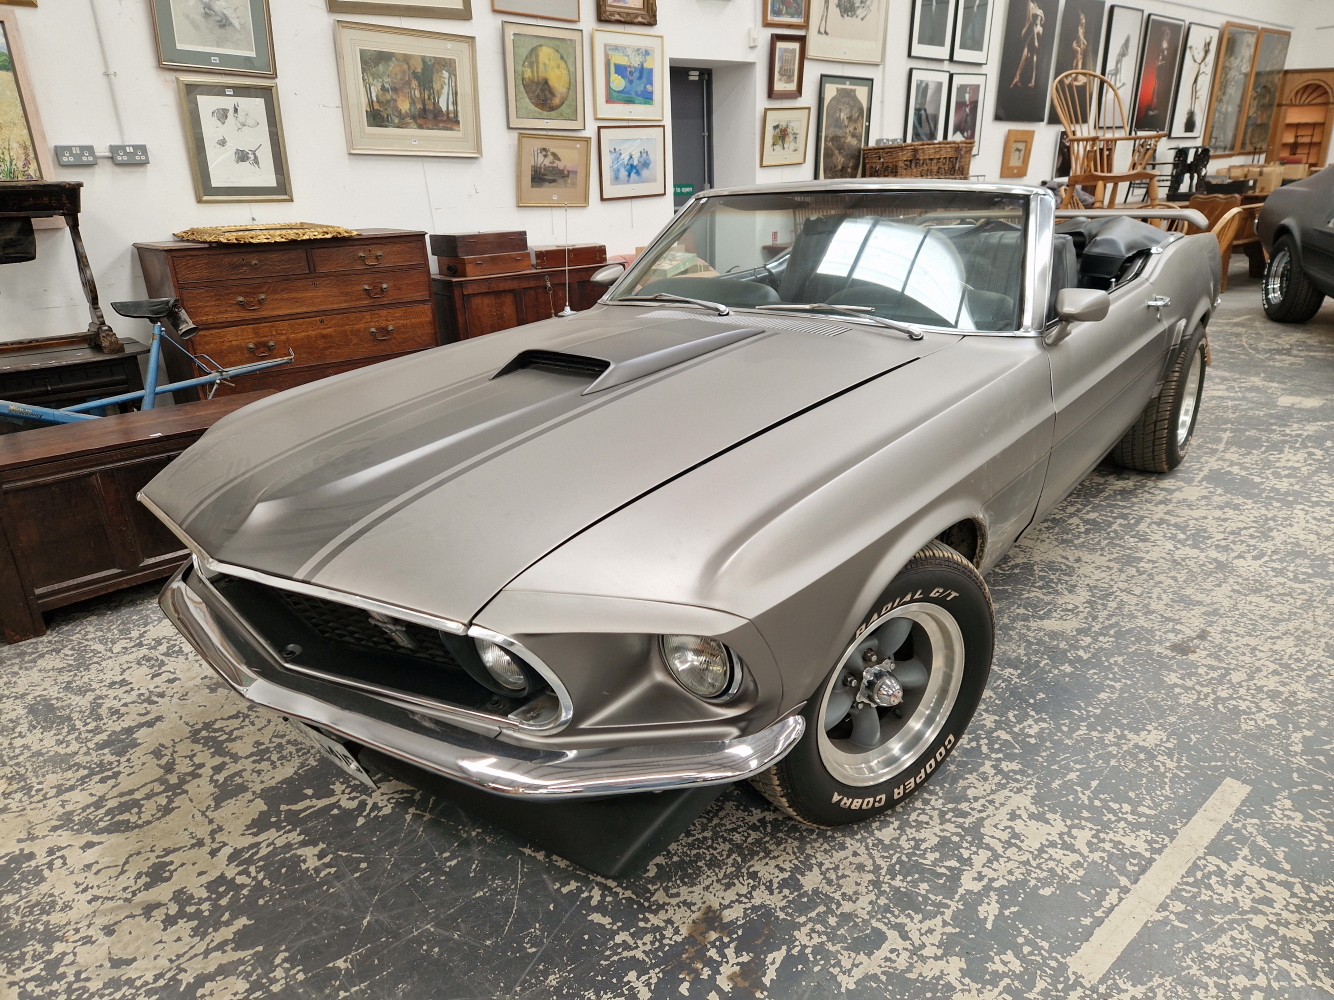 1969 FORD MUSTANG CONVERTABLE. 302 cu.in. V8 CONVERSION. WITH HOLLIE FOUR BARREL CARB. ELECTRIC - Image 11 of 19